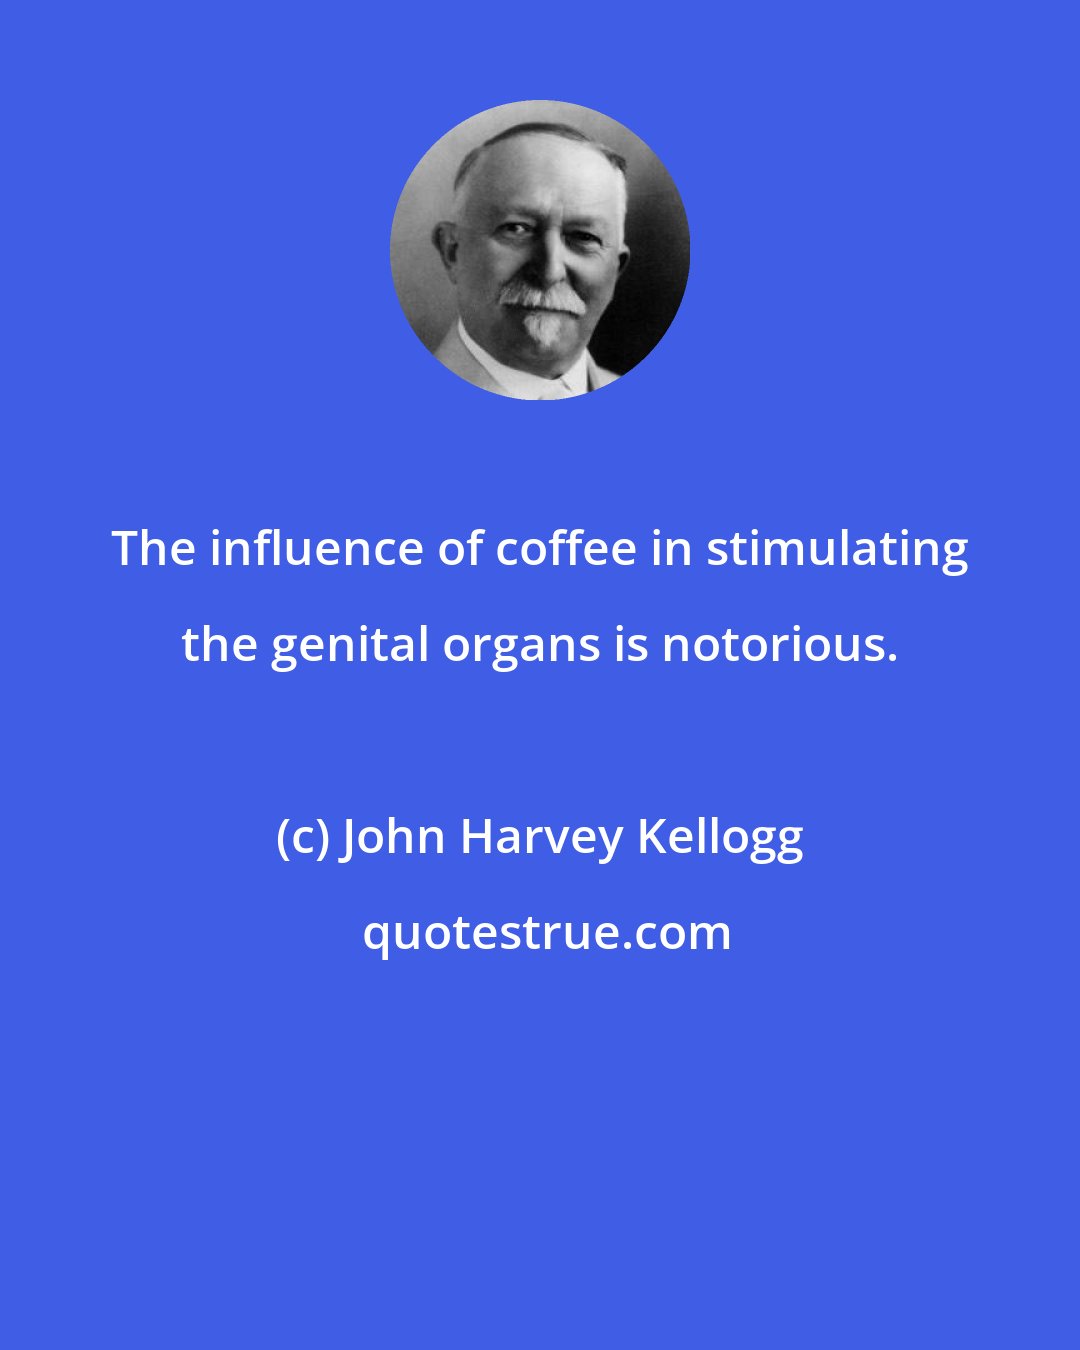 John Harvey Kellogg: The influence of coffee in stimulating the genital organs is notorious.